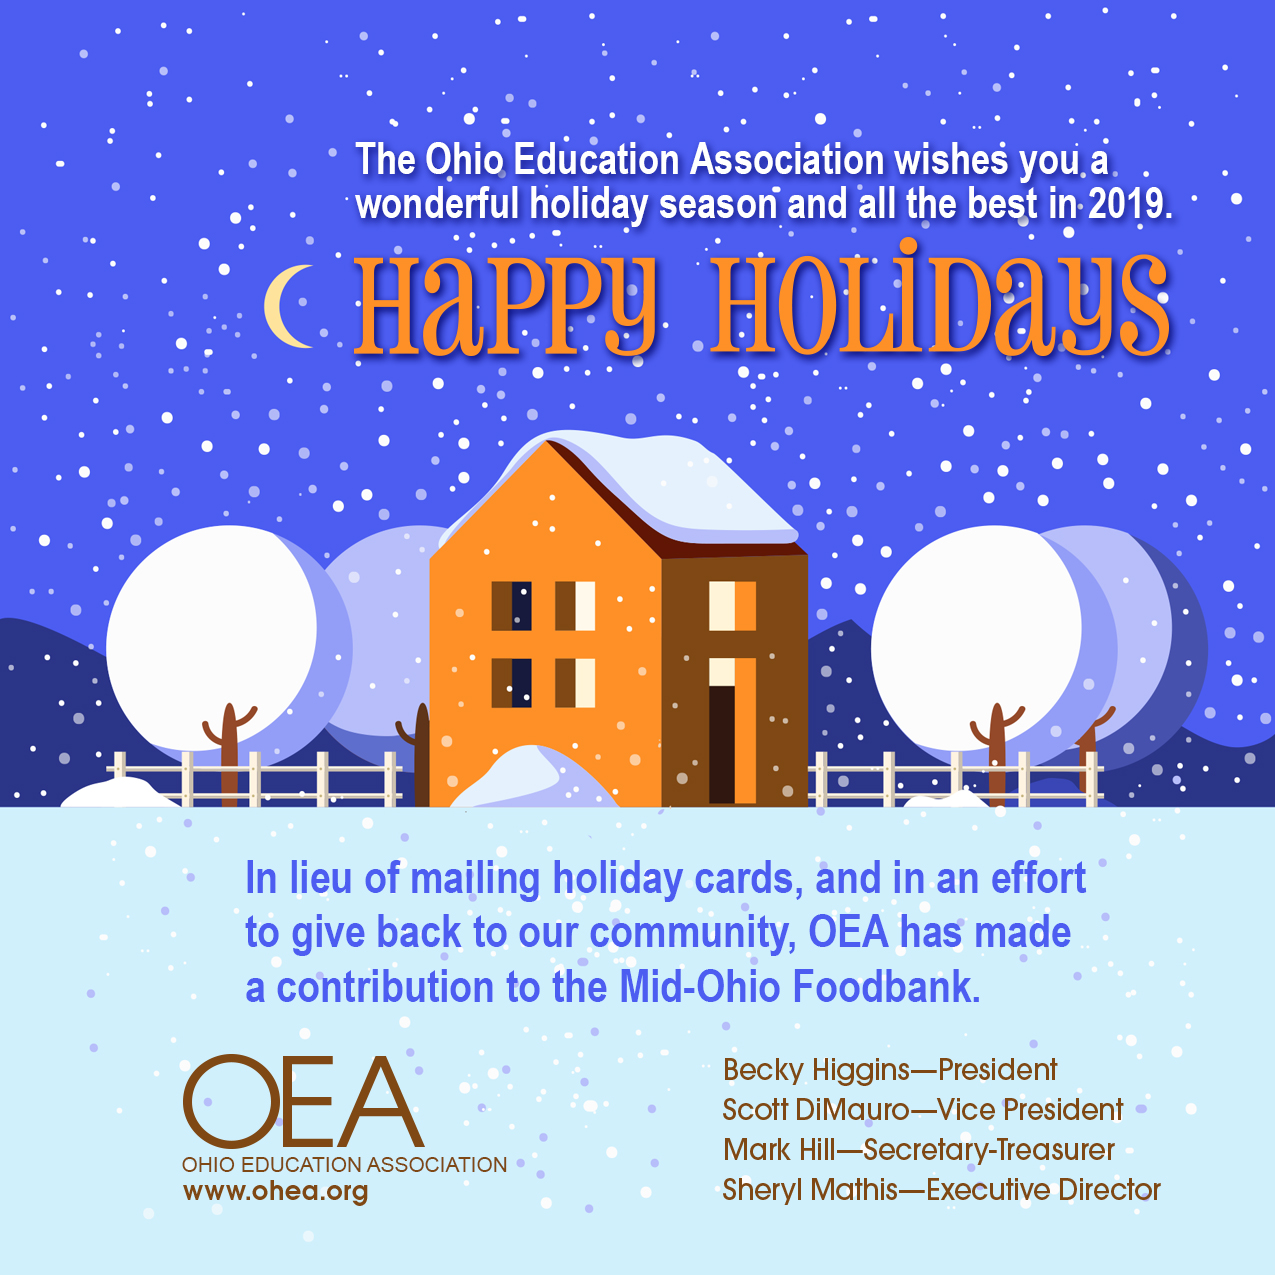 Image: Holiday Greetings From OEA